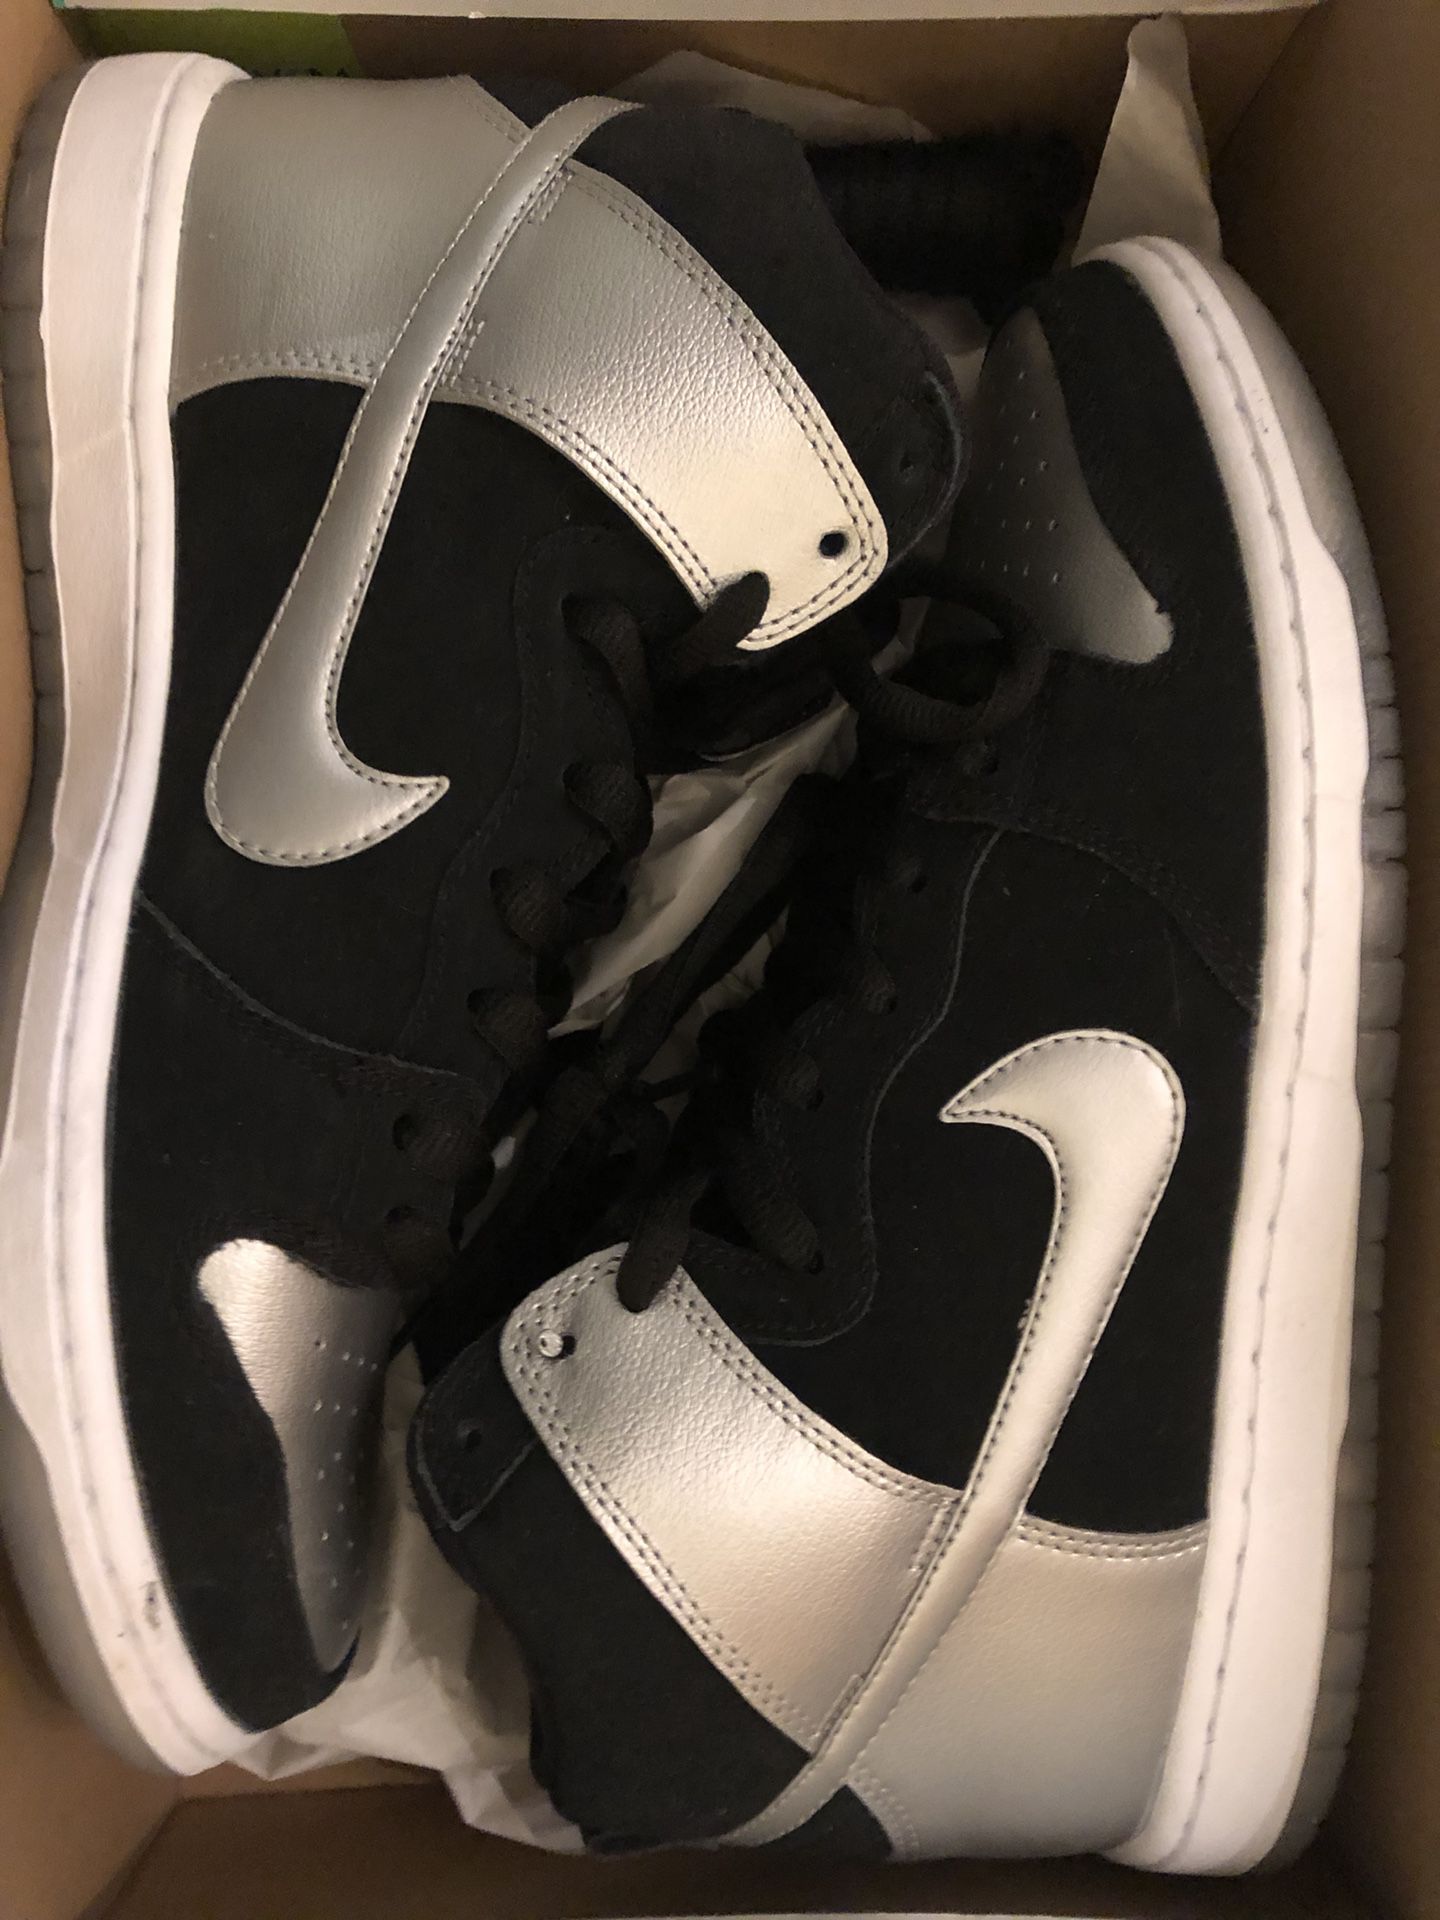 Exclusive Nike SB Dunks Size 10.5